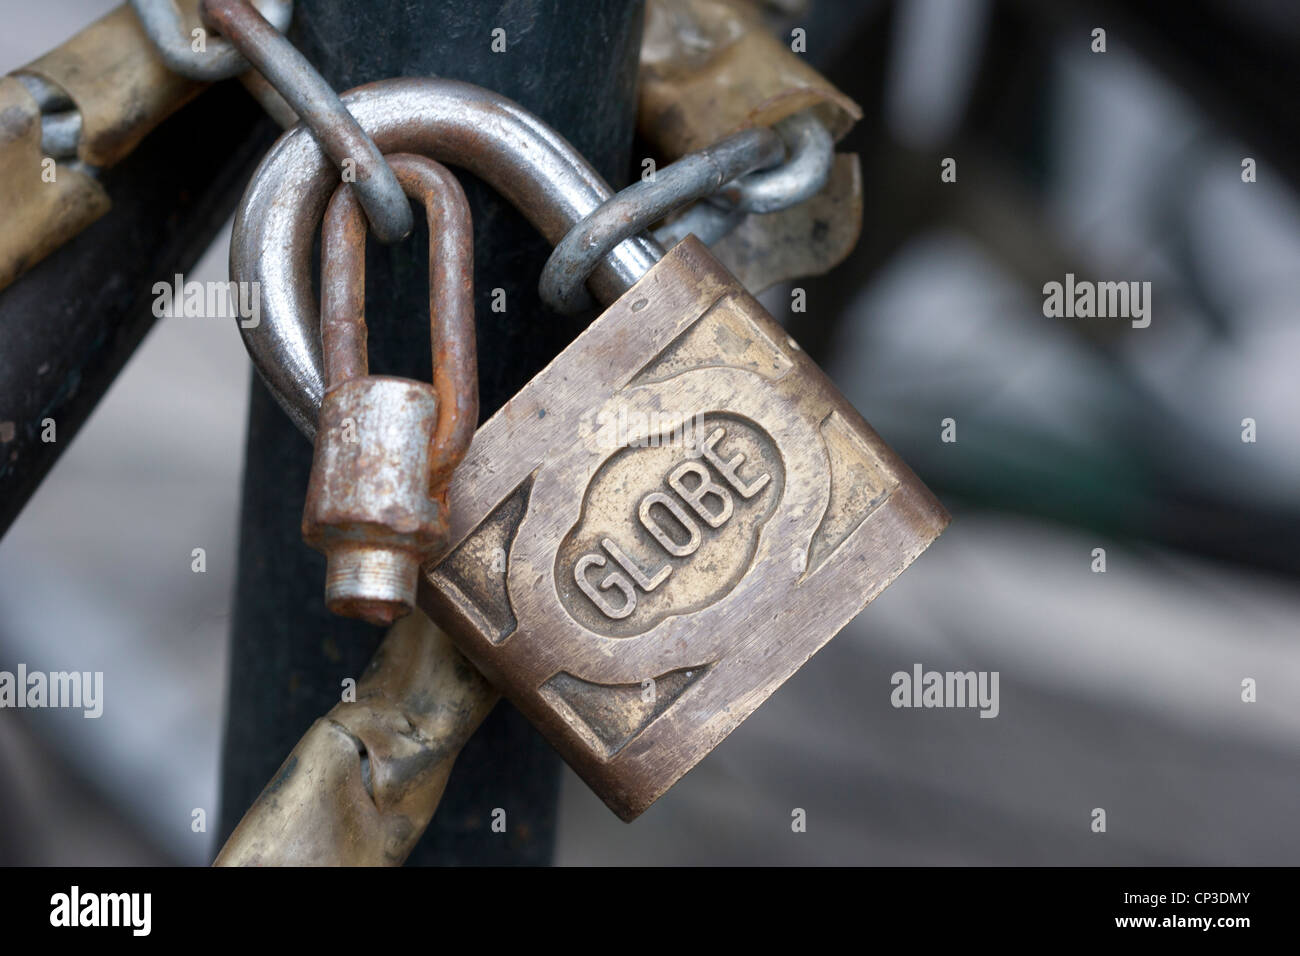 GLOBE brass padlock and chain on a bicycle, Shanghai, China. Stock Photo